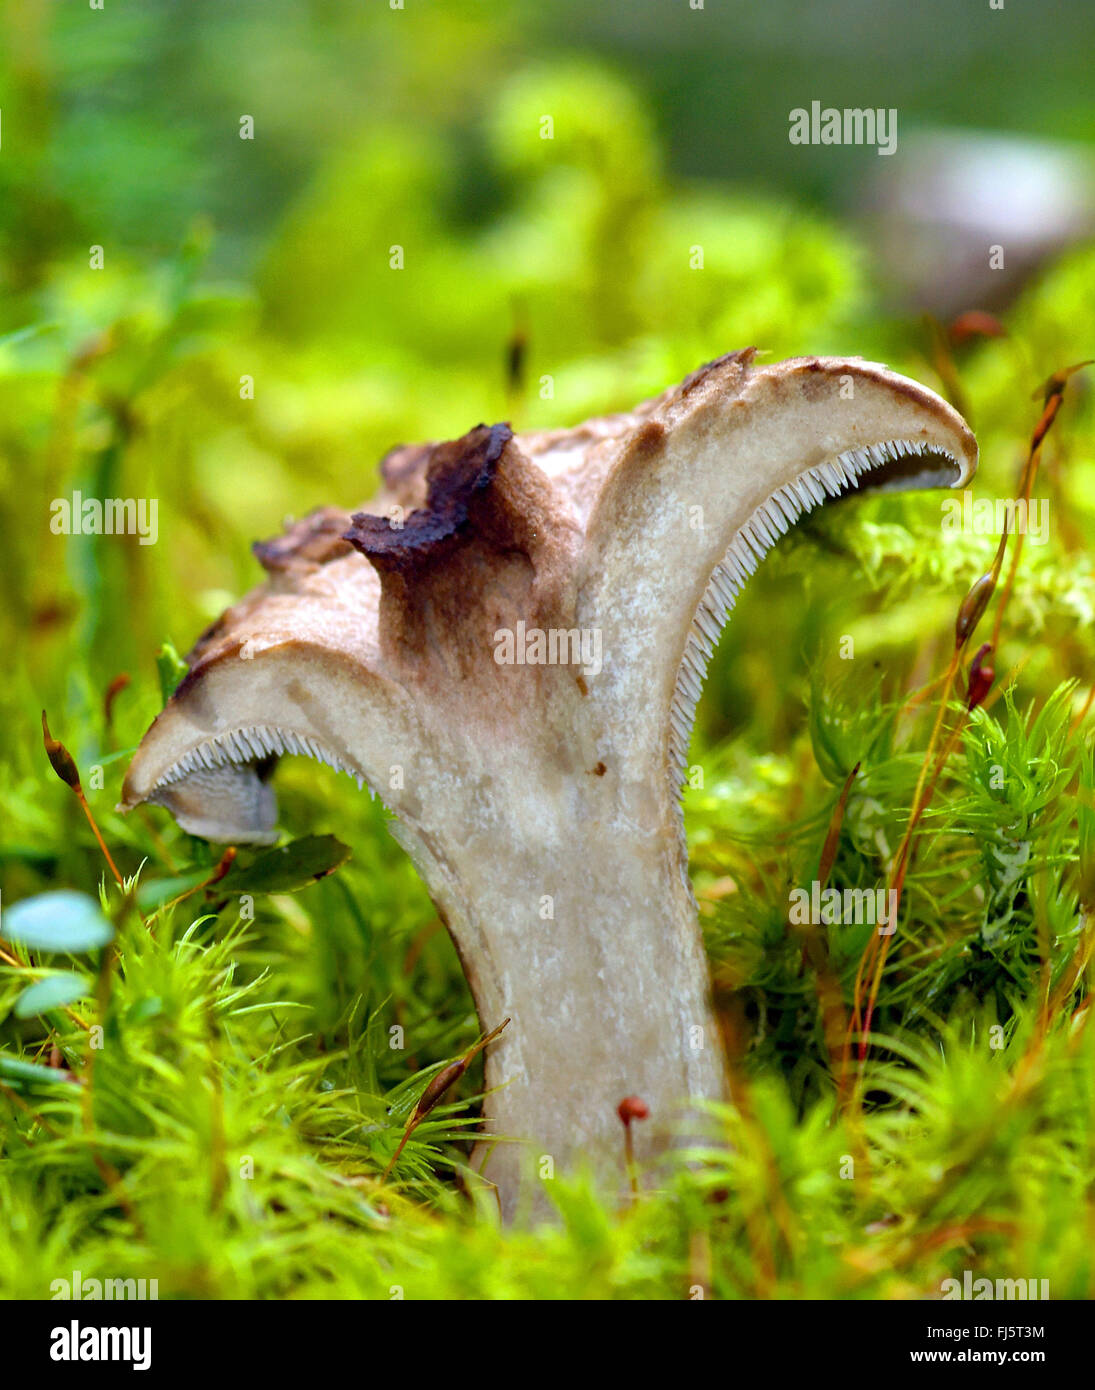 scaly tooth (Sarcodon imbricatus), halved fruiting body in moss, Italy, South Tyrol, Dolomites Stock Photo